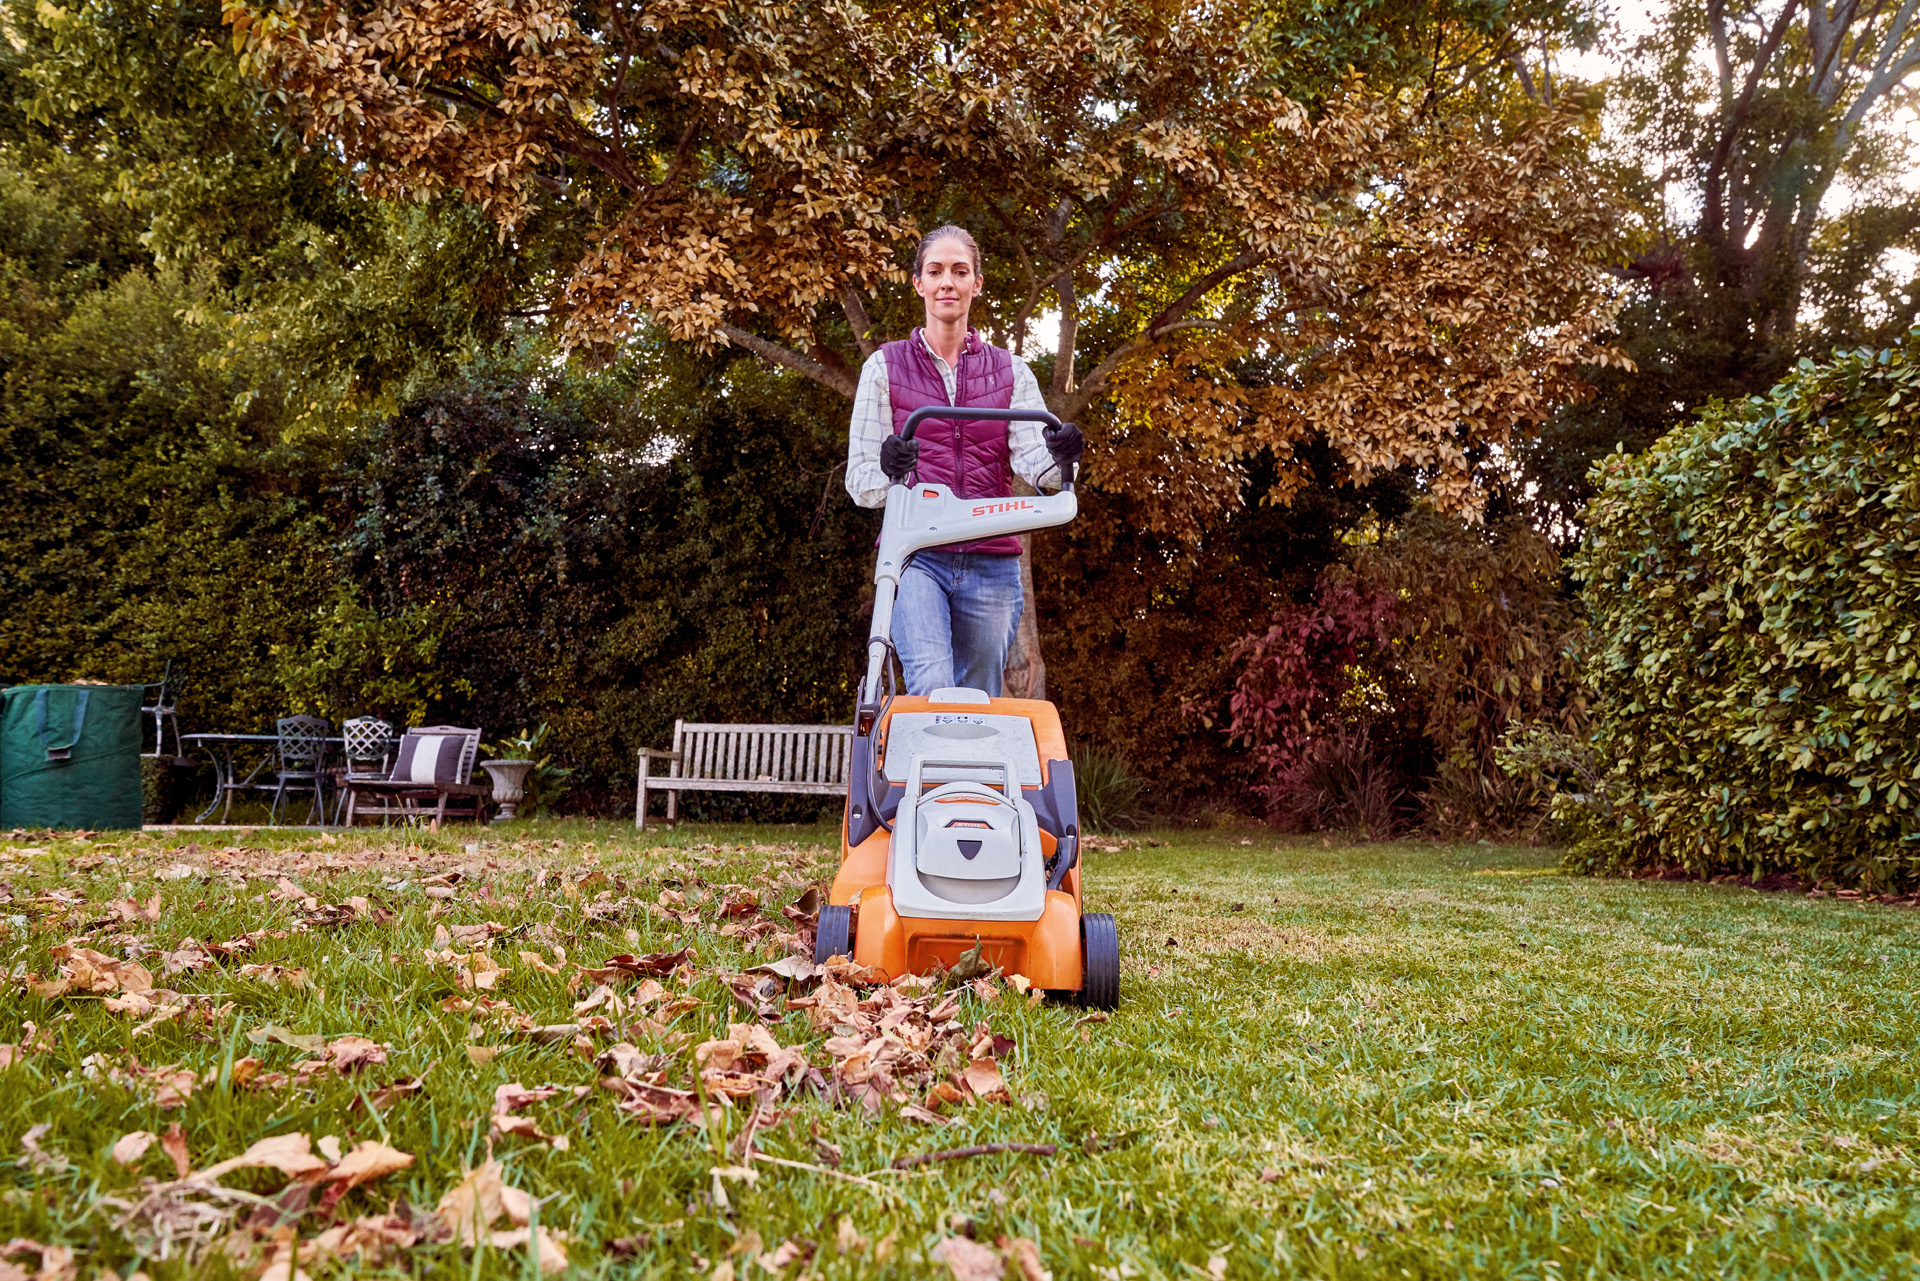 Woman using STIHL RMA 339 C battery-powered lawnmower in a garden for lawn care in autumn